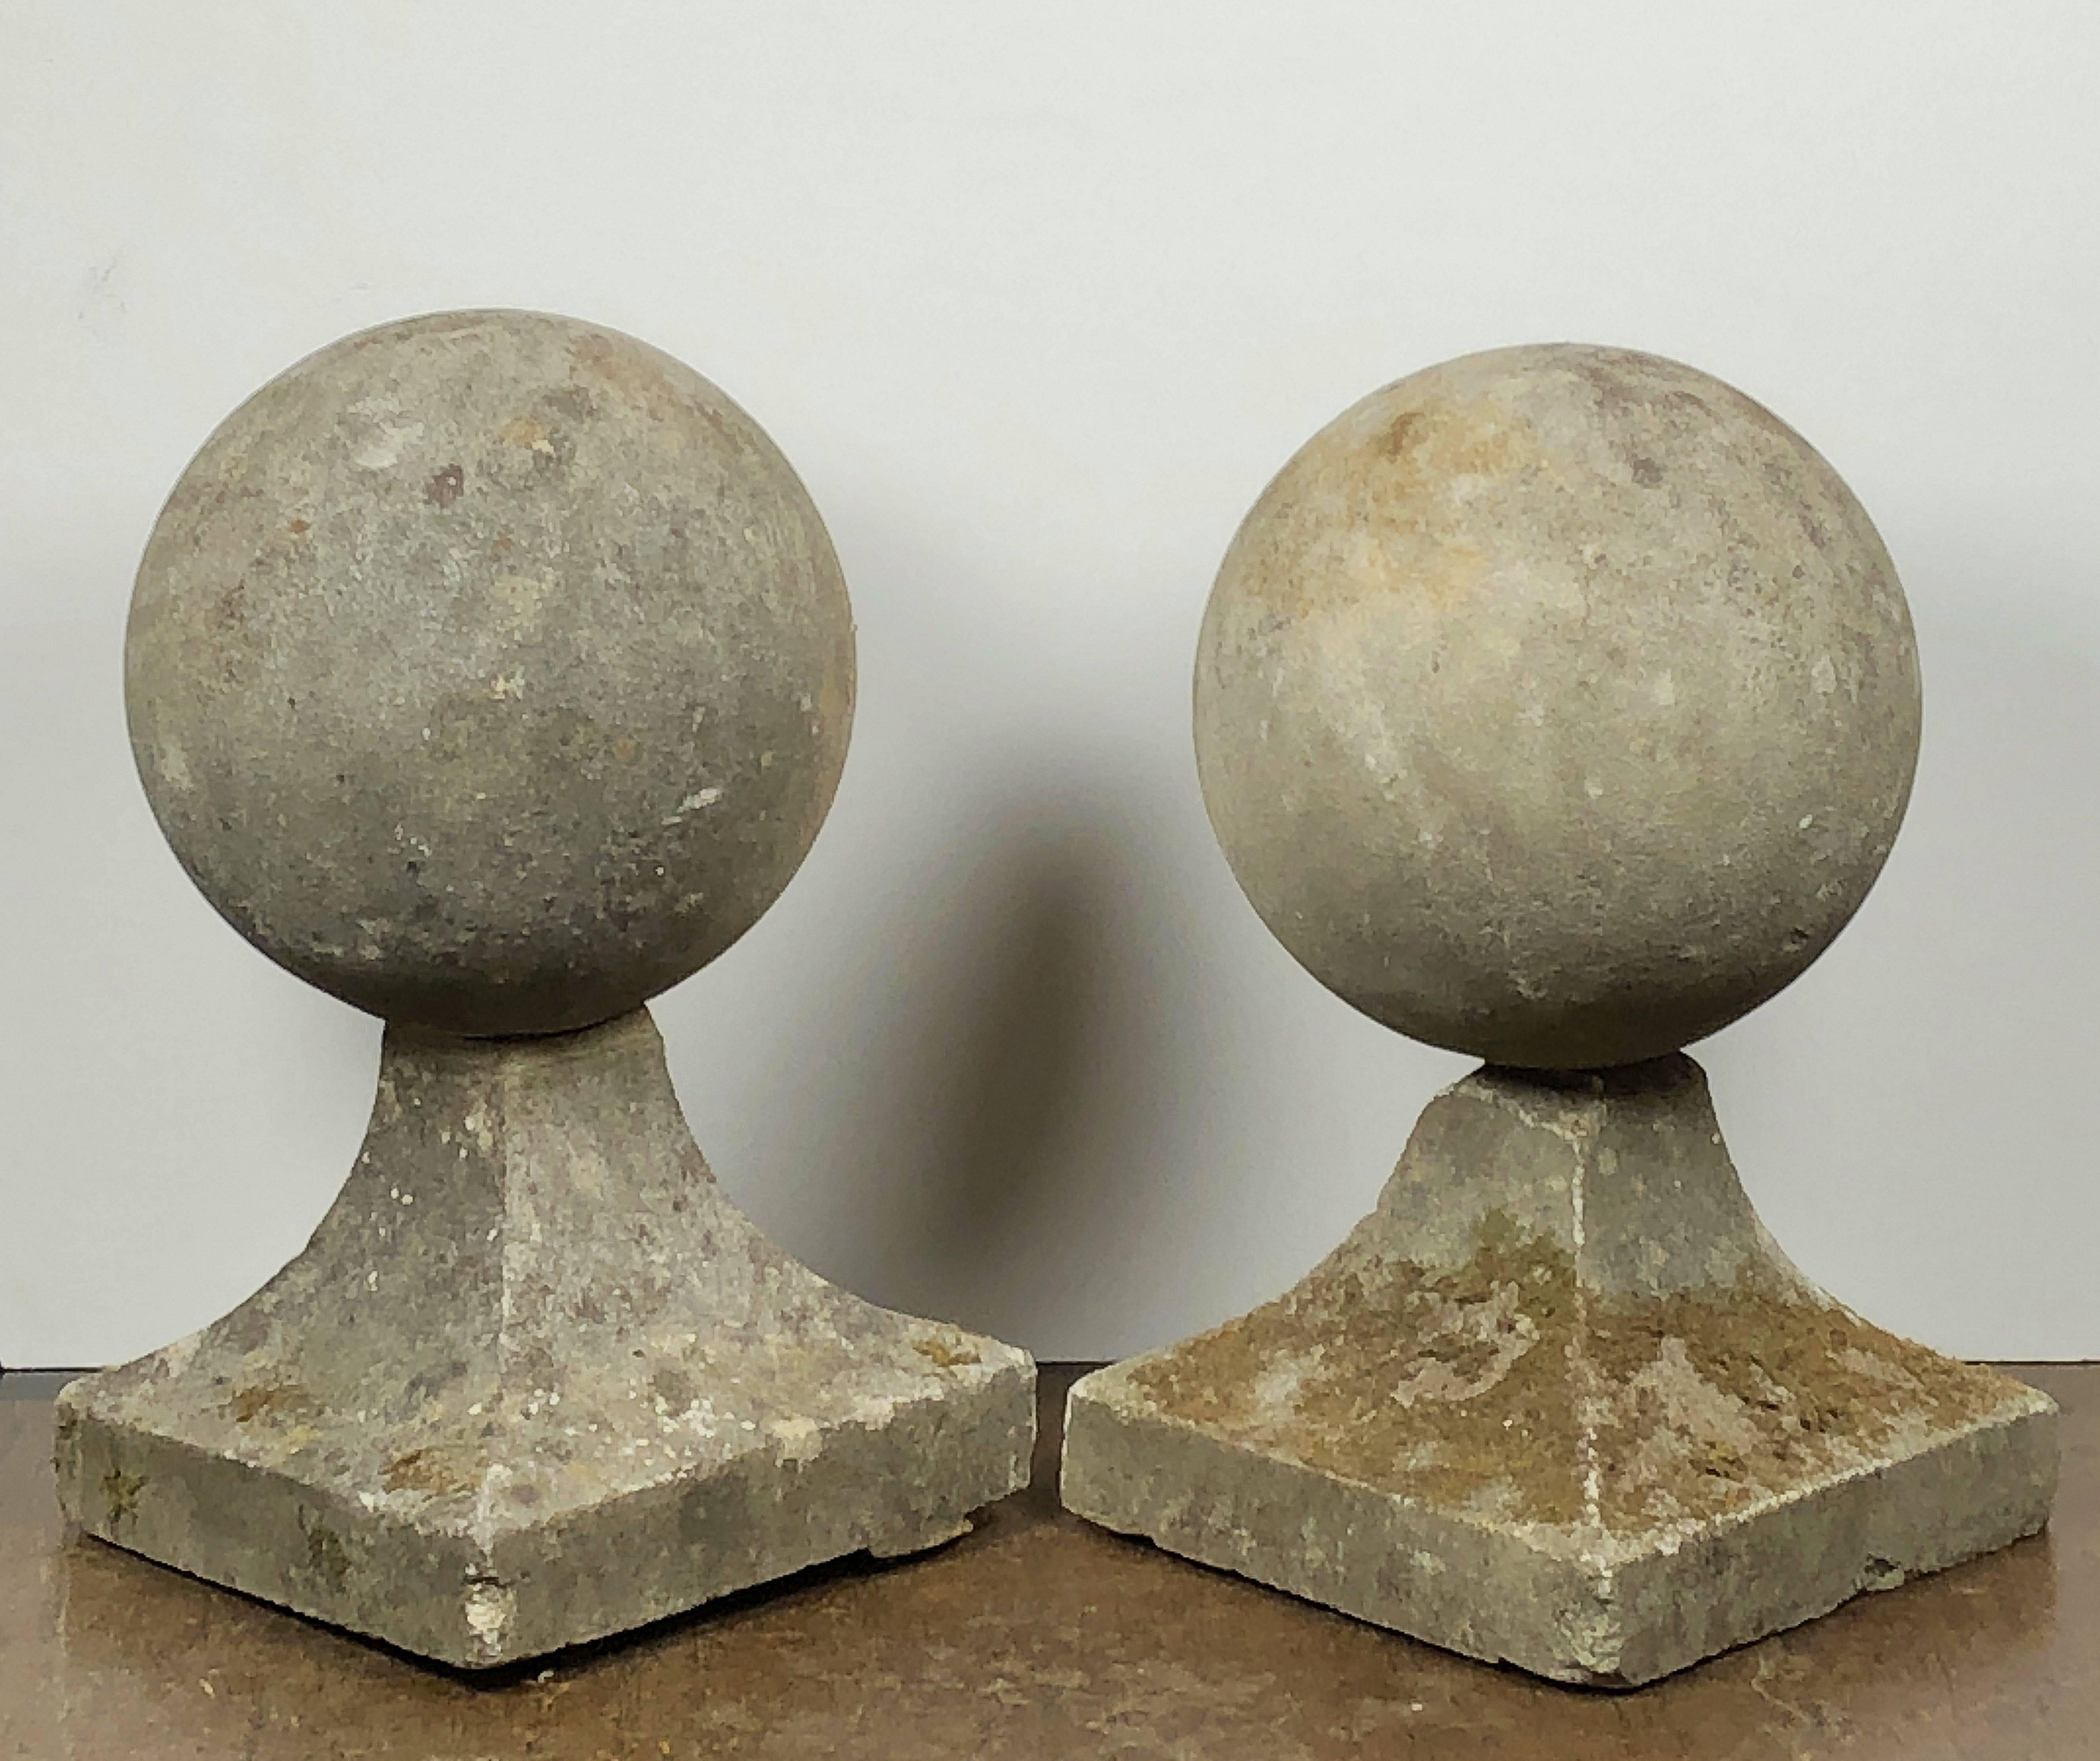 A fine pair of English coping balls of composition stone, each ball set upon a square plinth base.

Dimensions are H 23 inches x D 13 inches

Perfect for use as an indoor or outdoor garden, garden room, or patio feature!

Individually priced - $2495